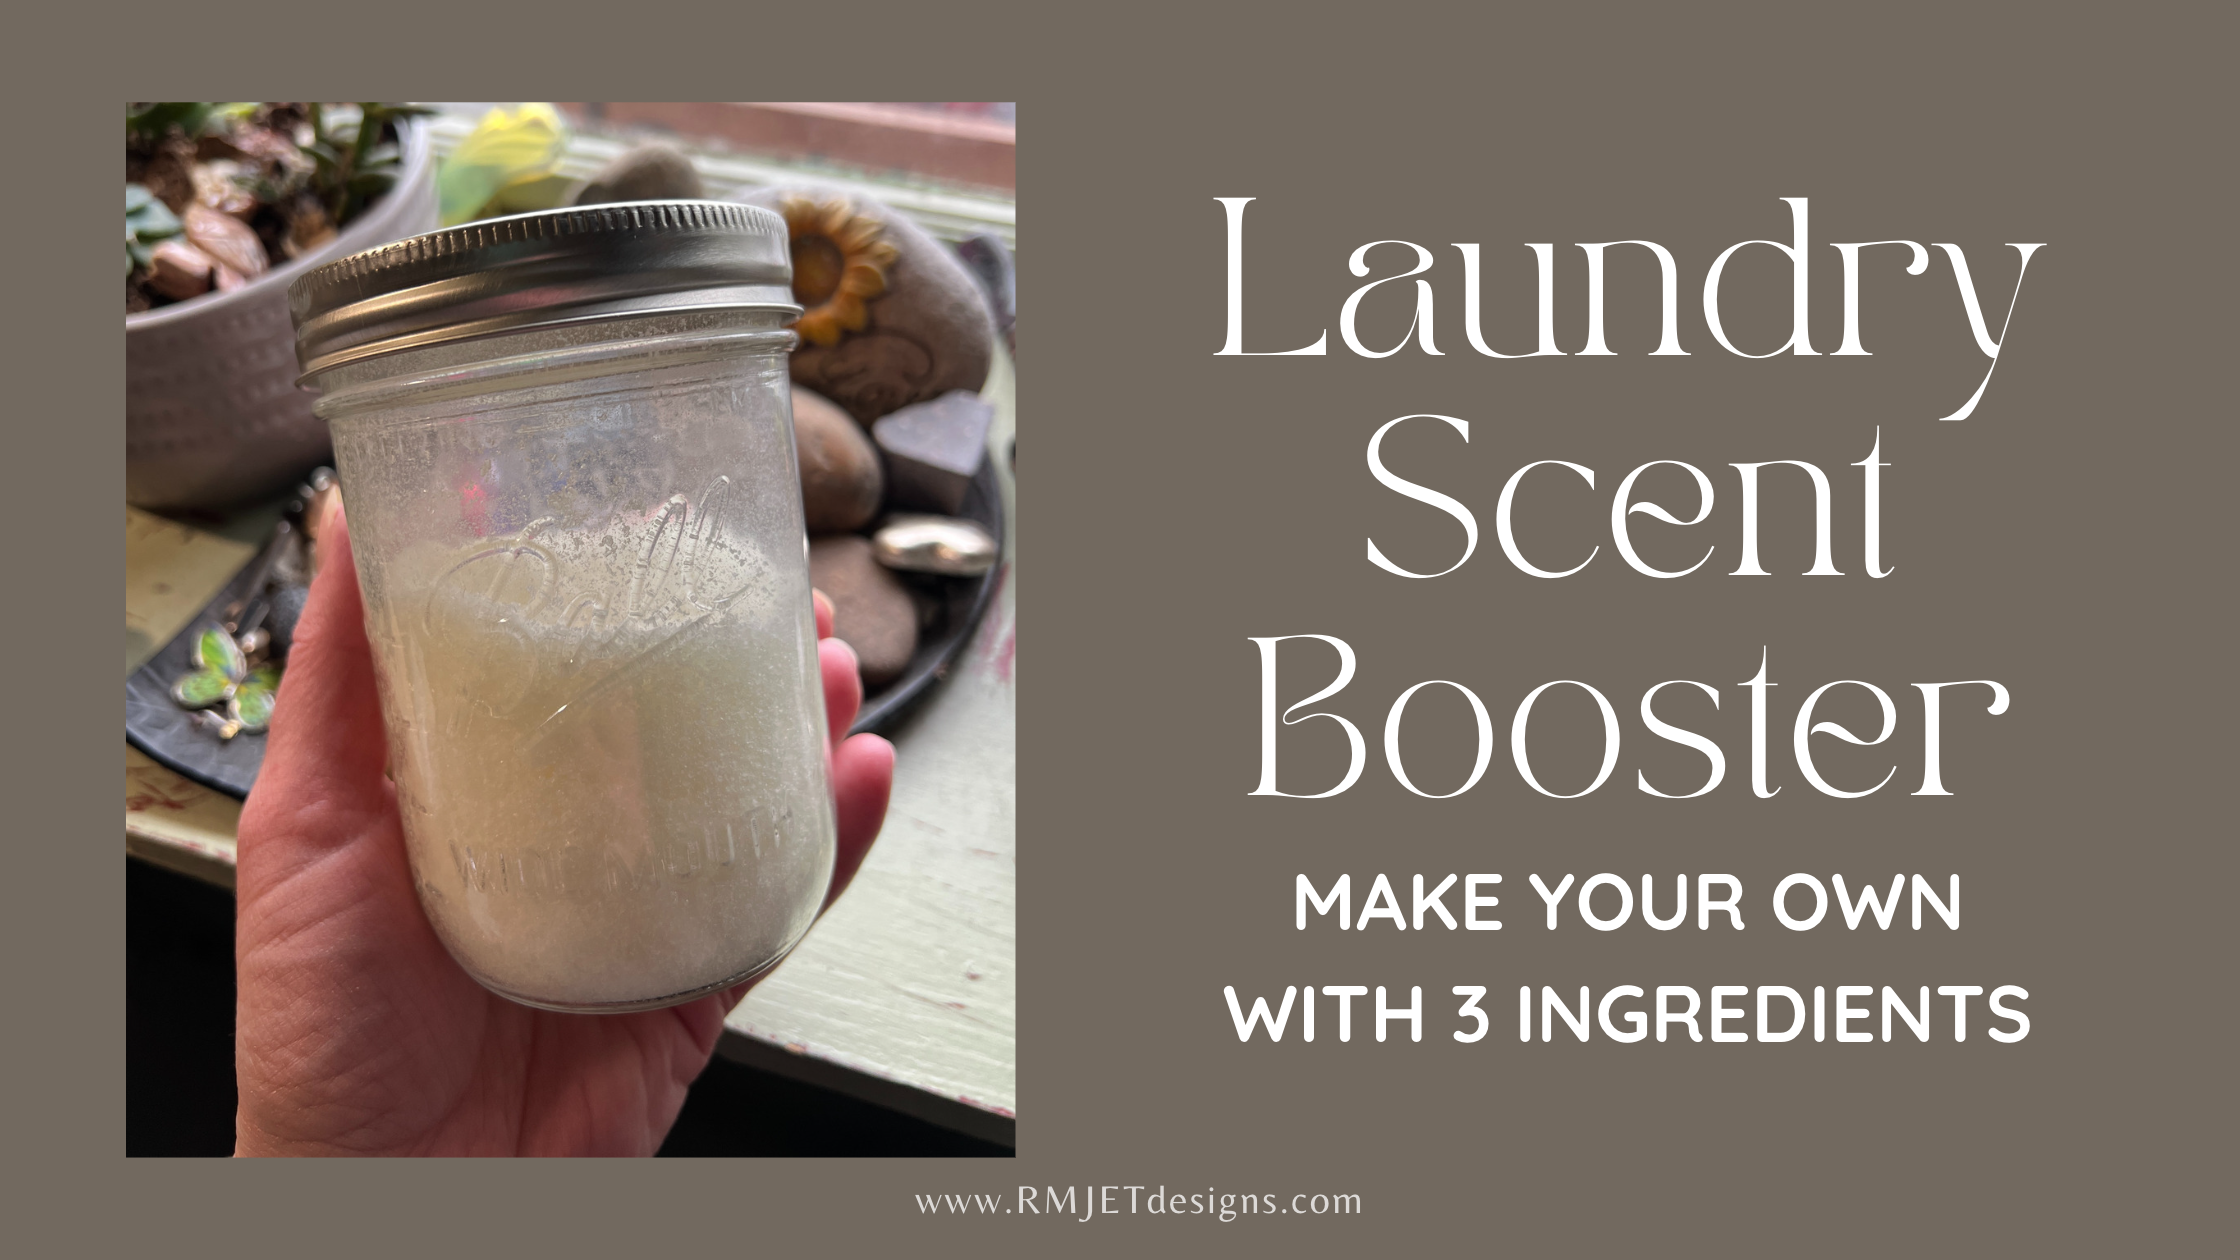 Laundry Scent Booster - Make Your Own with 3 Ingredients By RMJETdesigns